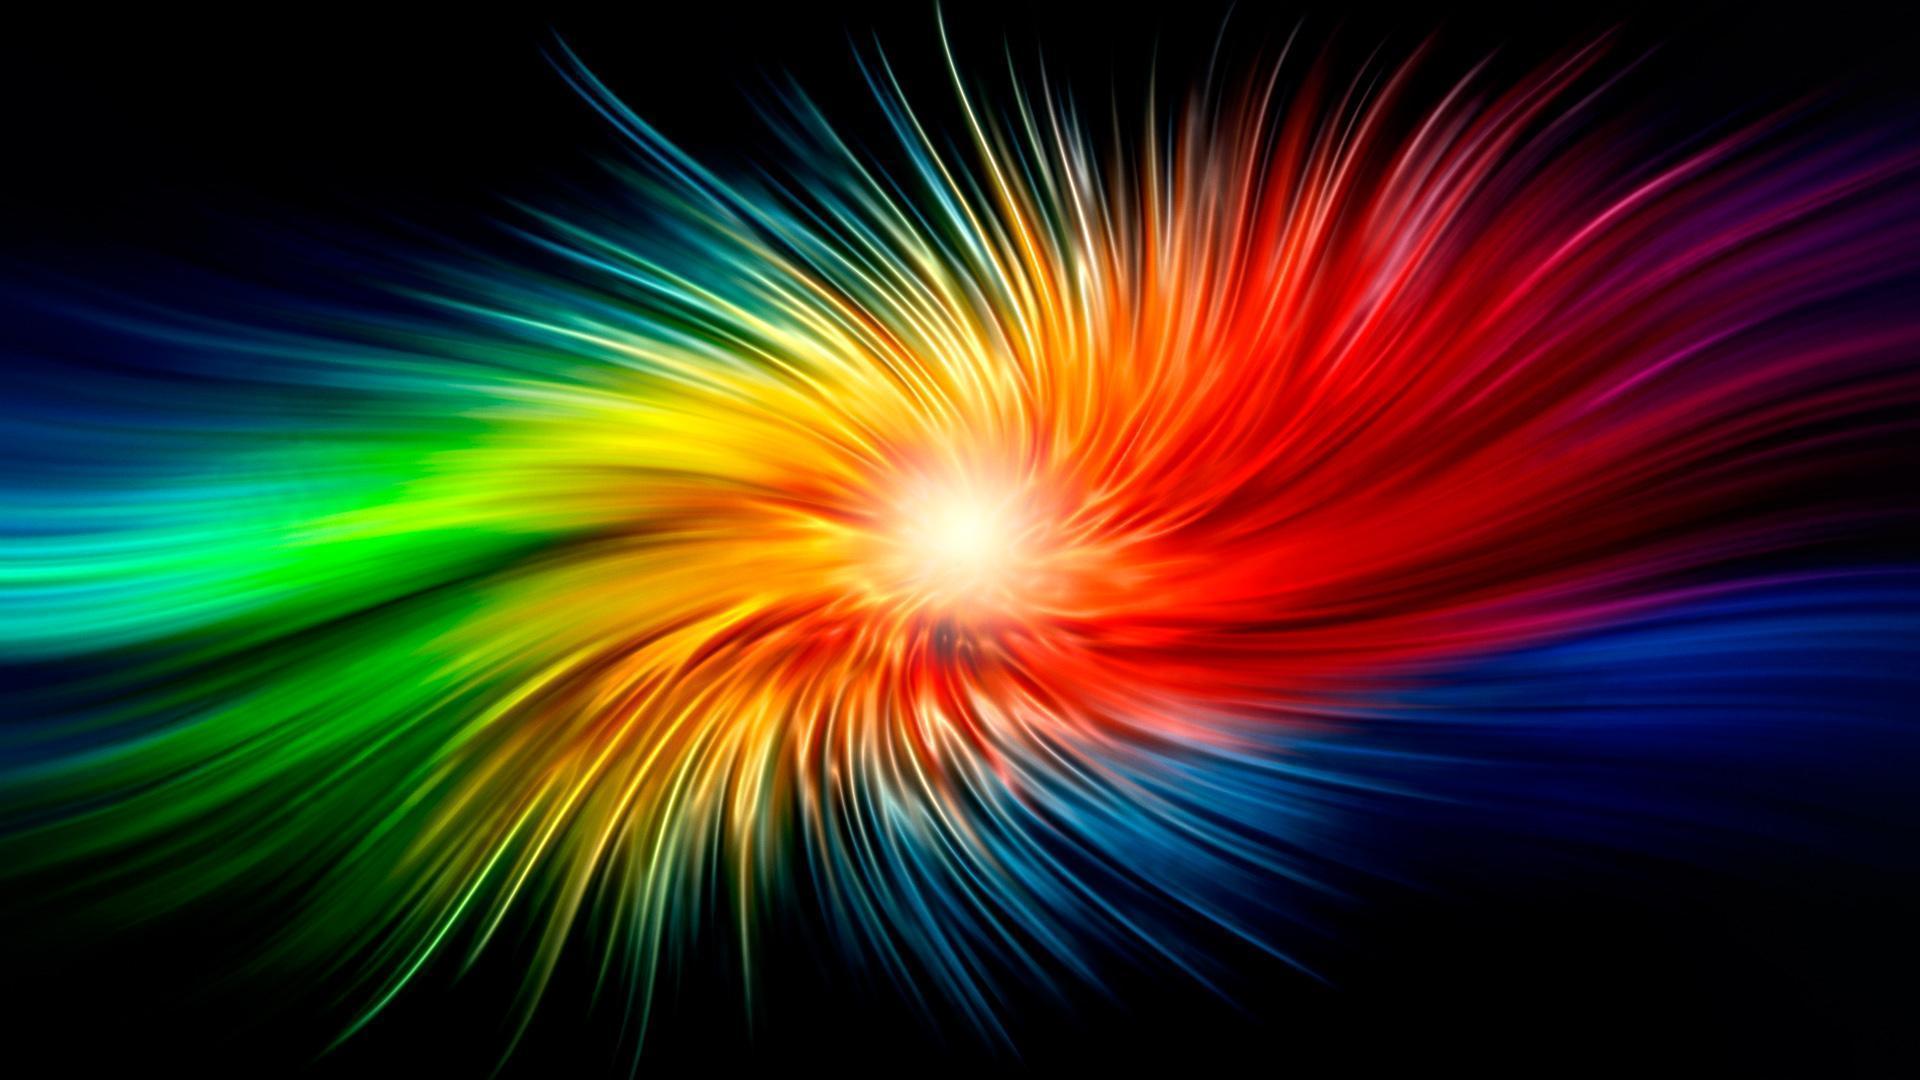 Awesome Colorful Background 2921 Hd Wallpaper Awesome Wallpaper